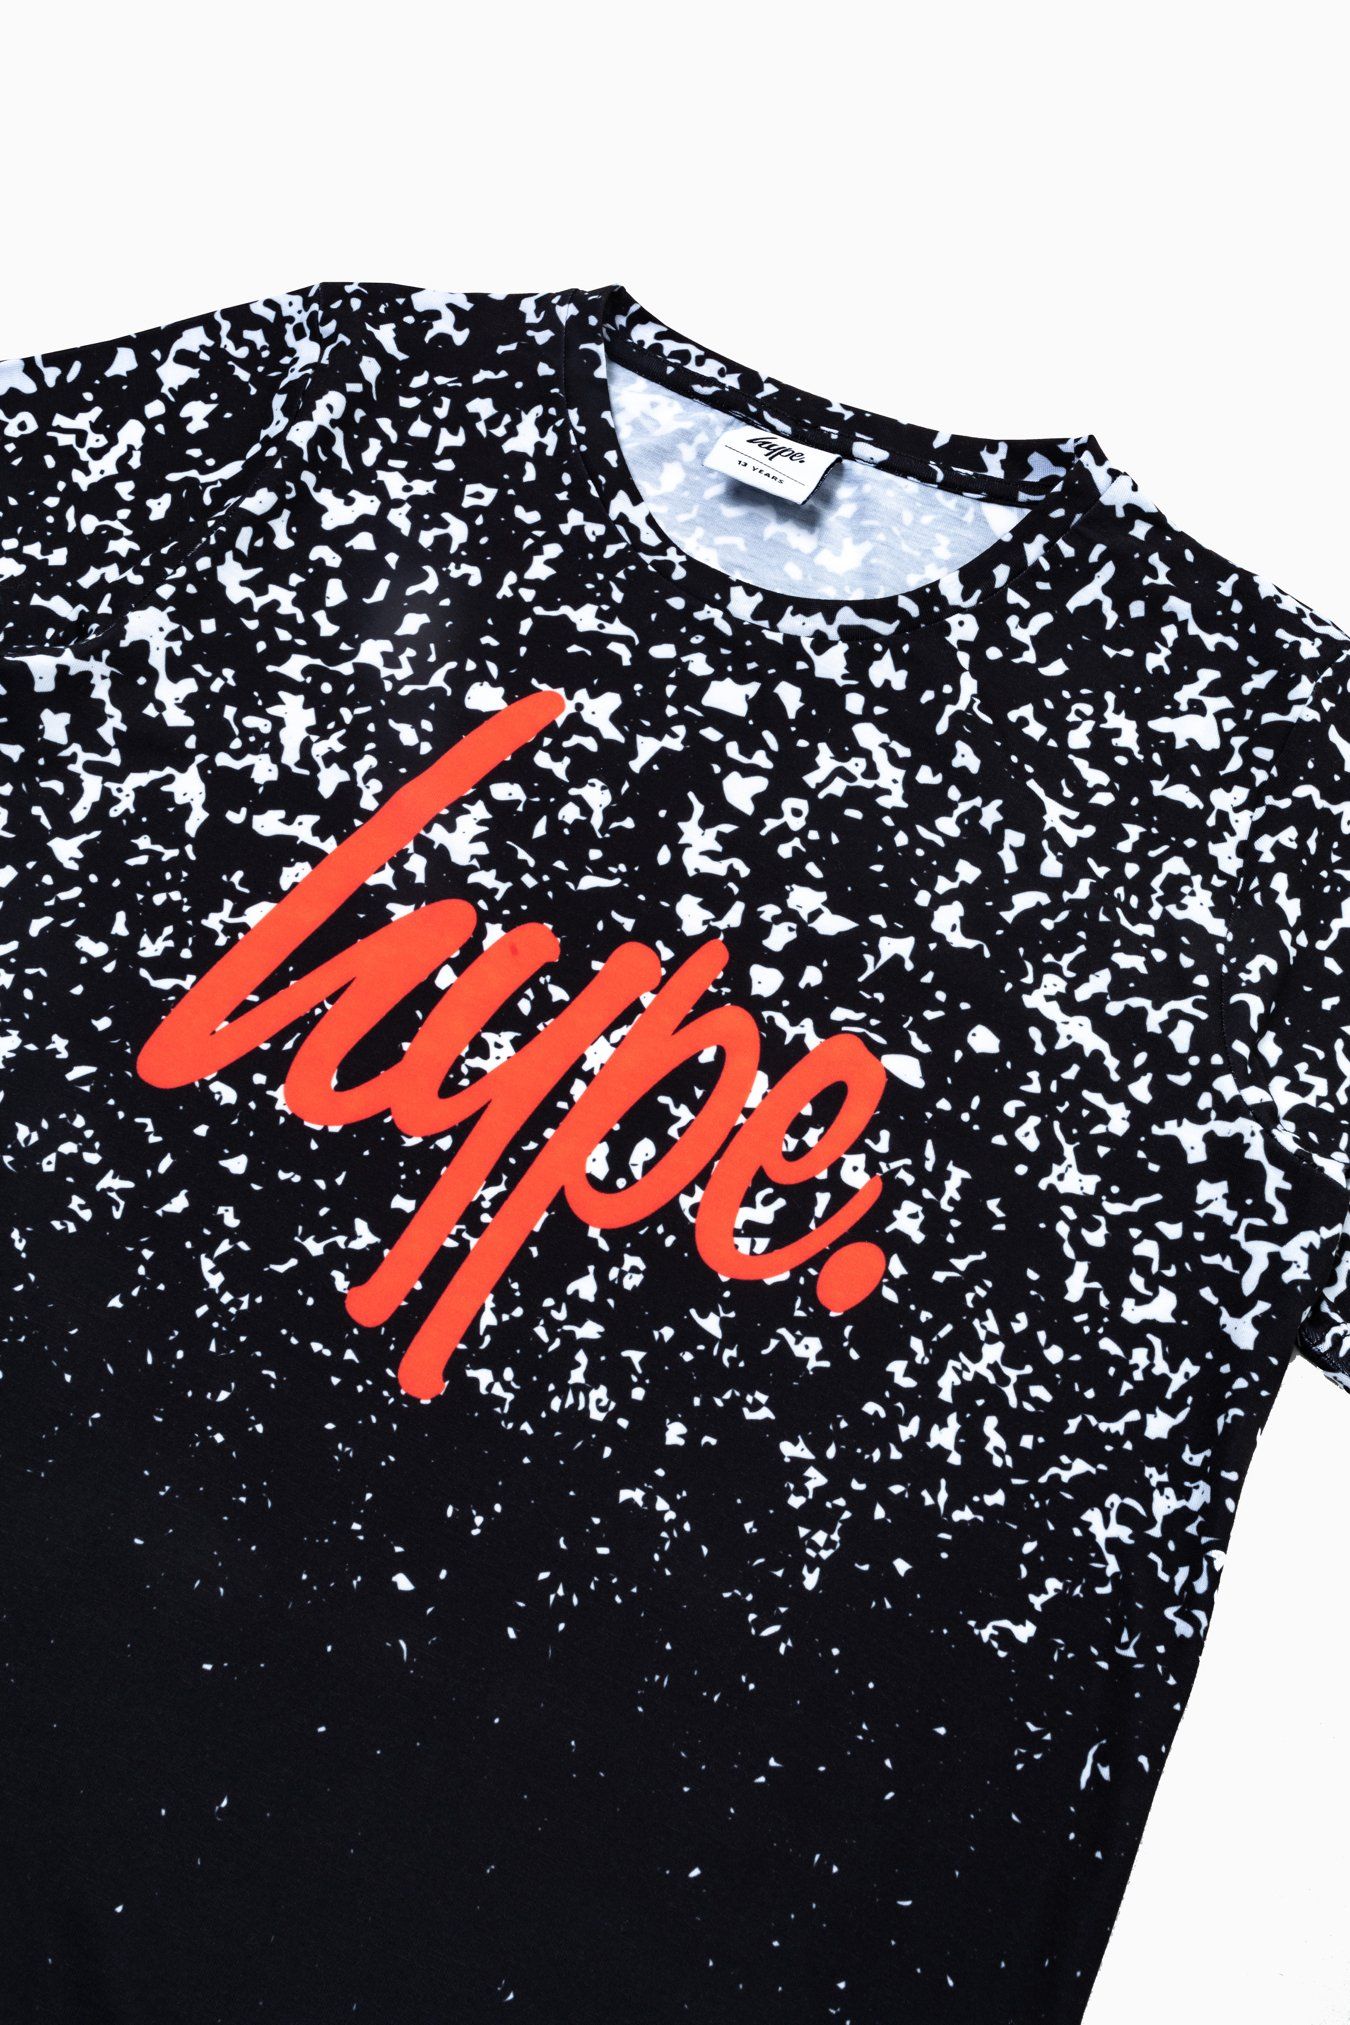 The HYPE. speckle fade kids t-shirt features a monochrome colour palette with a red injection. Featuring a crew neck line, short sleeves and the iconic HYPE. script logo across the front in a contrasting red in our iconic fade with a speckle overlay print. For a casual look, wear with a pair of sweat joggers, or if you're after a smarter look, a pair of skinny fit denim jeans and box fresh kicks. Machine wash at 30 degrees.